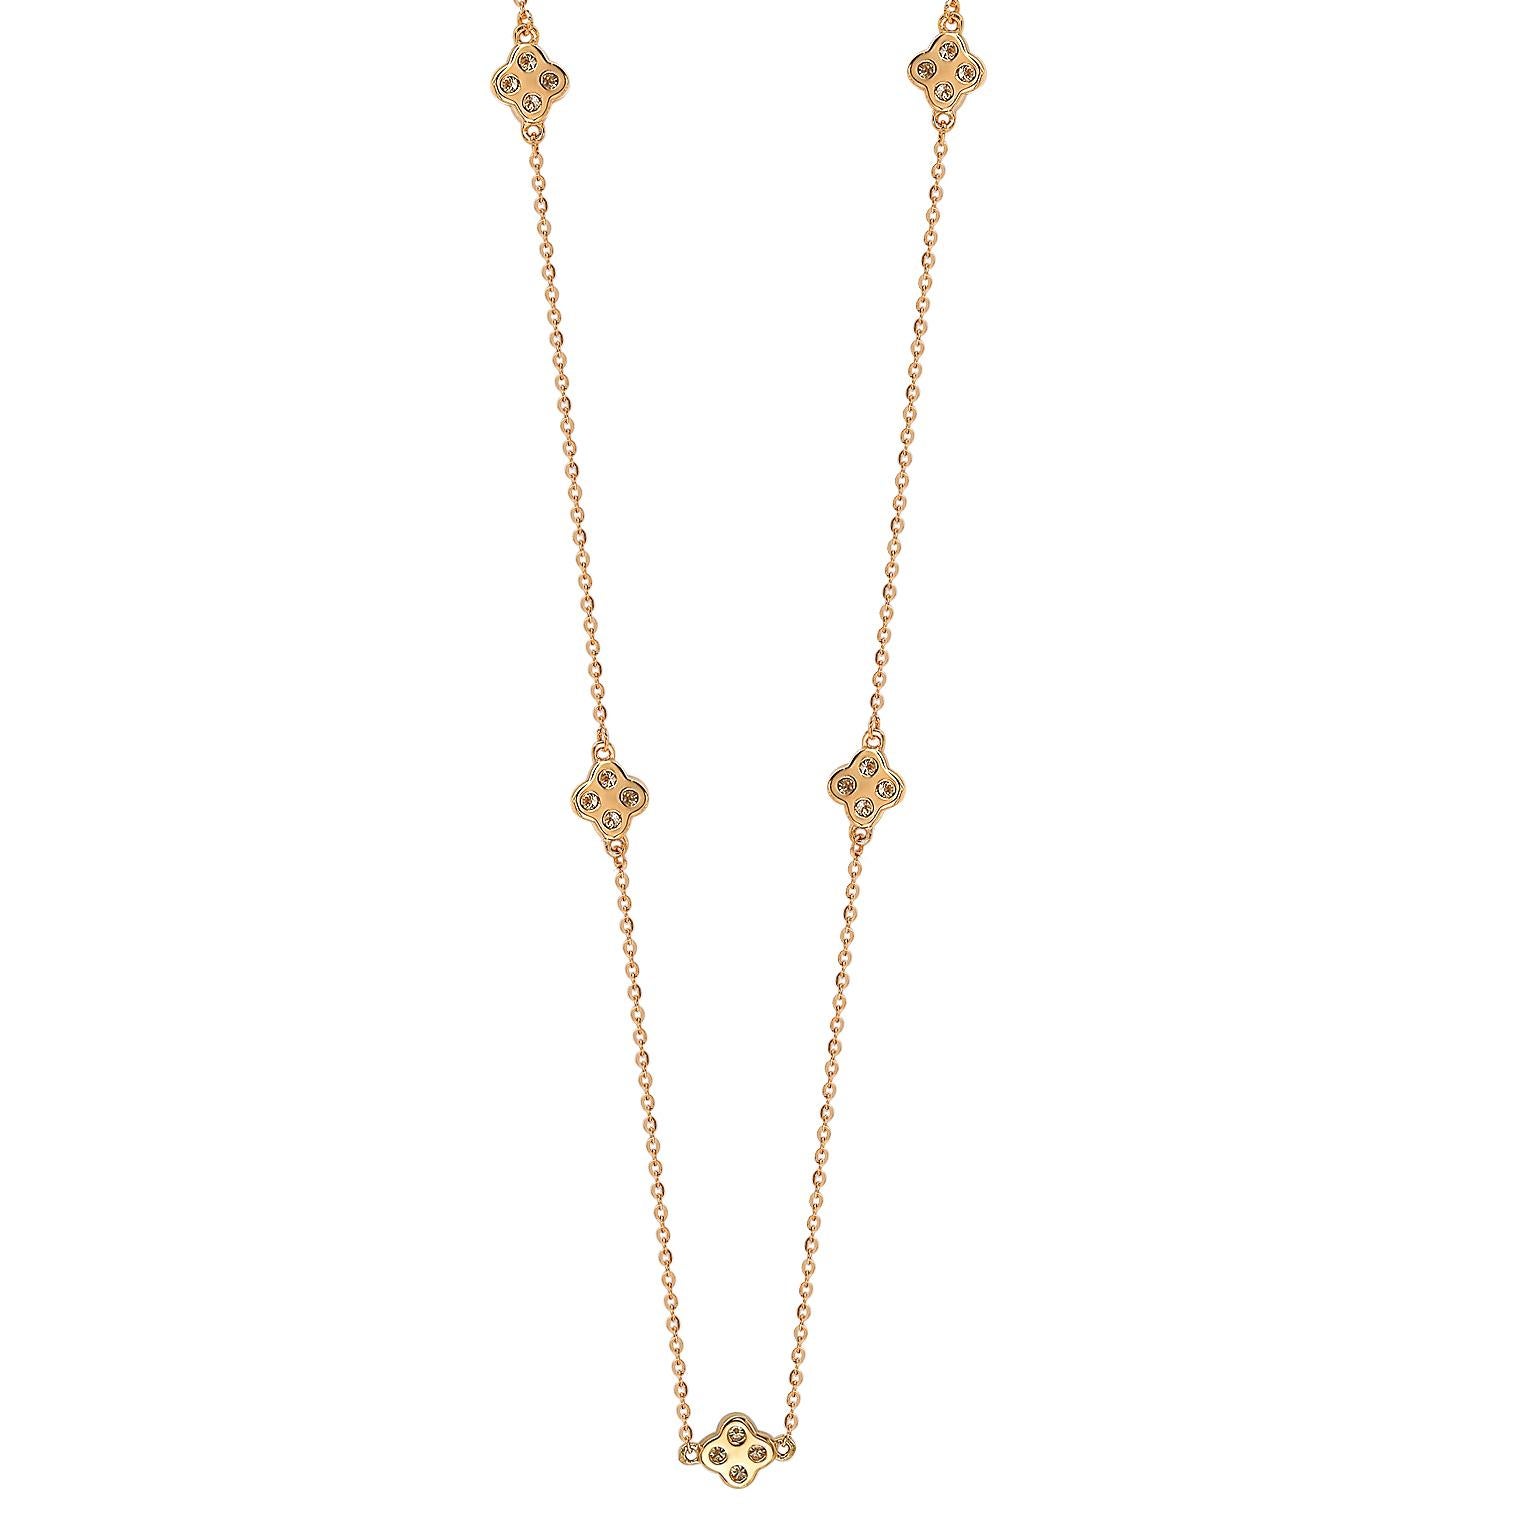 This unique Suzy Levian diamond clover by the yard necklace displays round-cut diamonds on 14 karat rose gold setting. This gorgeous necklace contains 20, 1.75 mm white round cut diamonds totaling .40 cttw. The necklace has 7 clovers, each clover